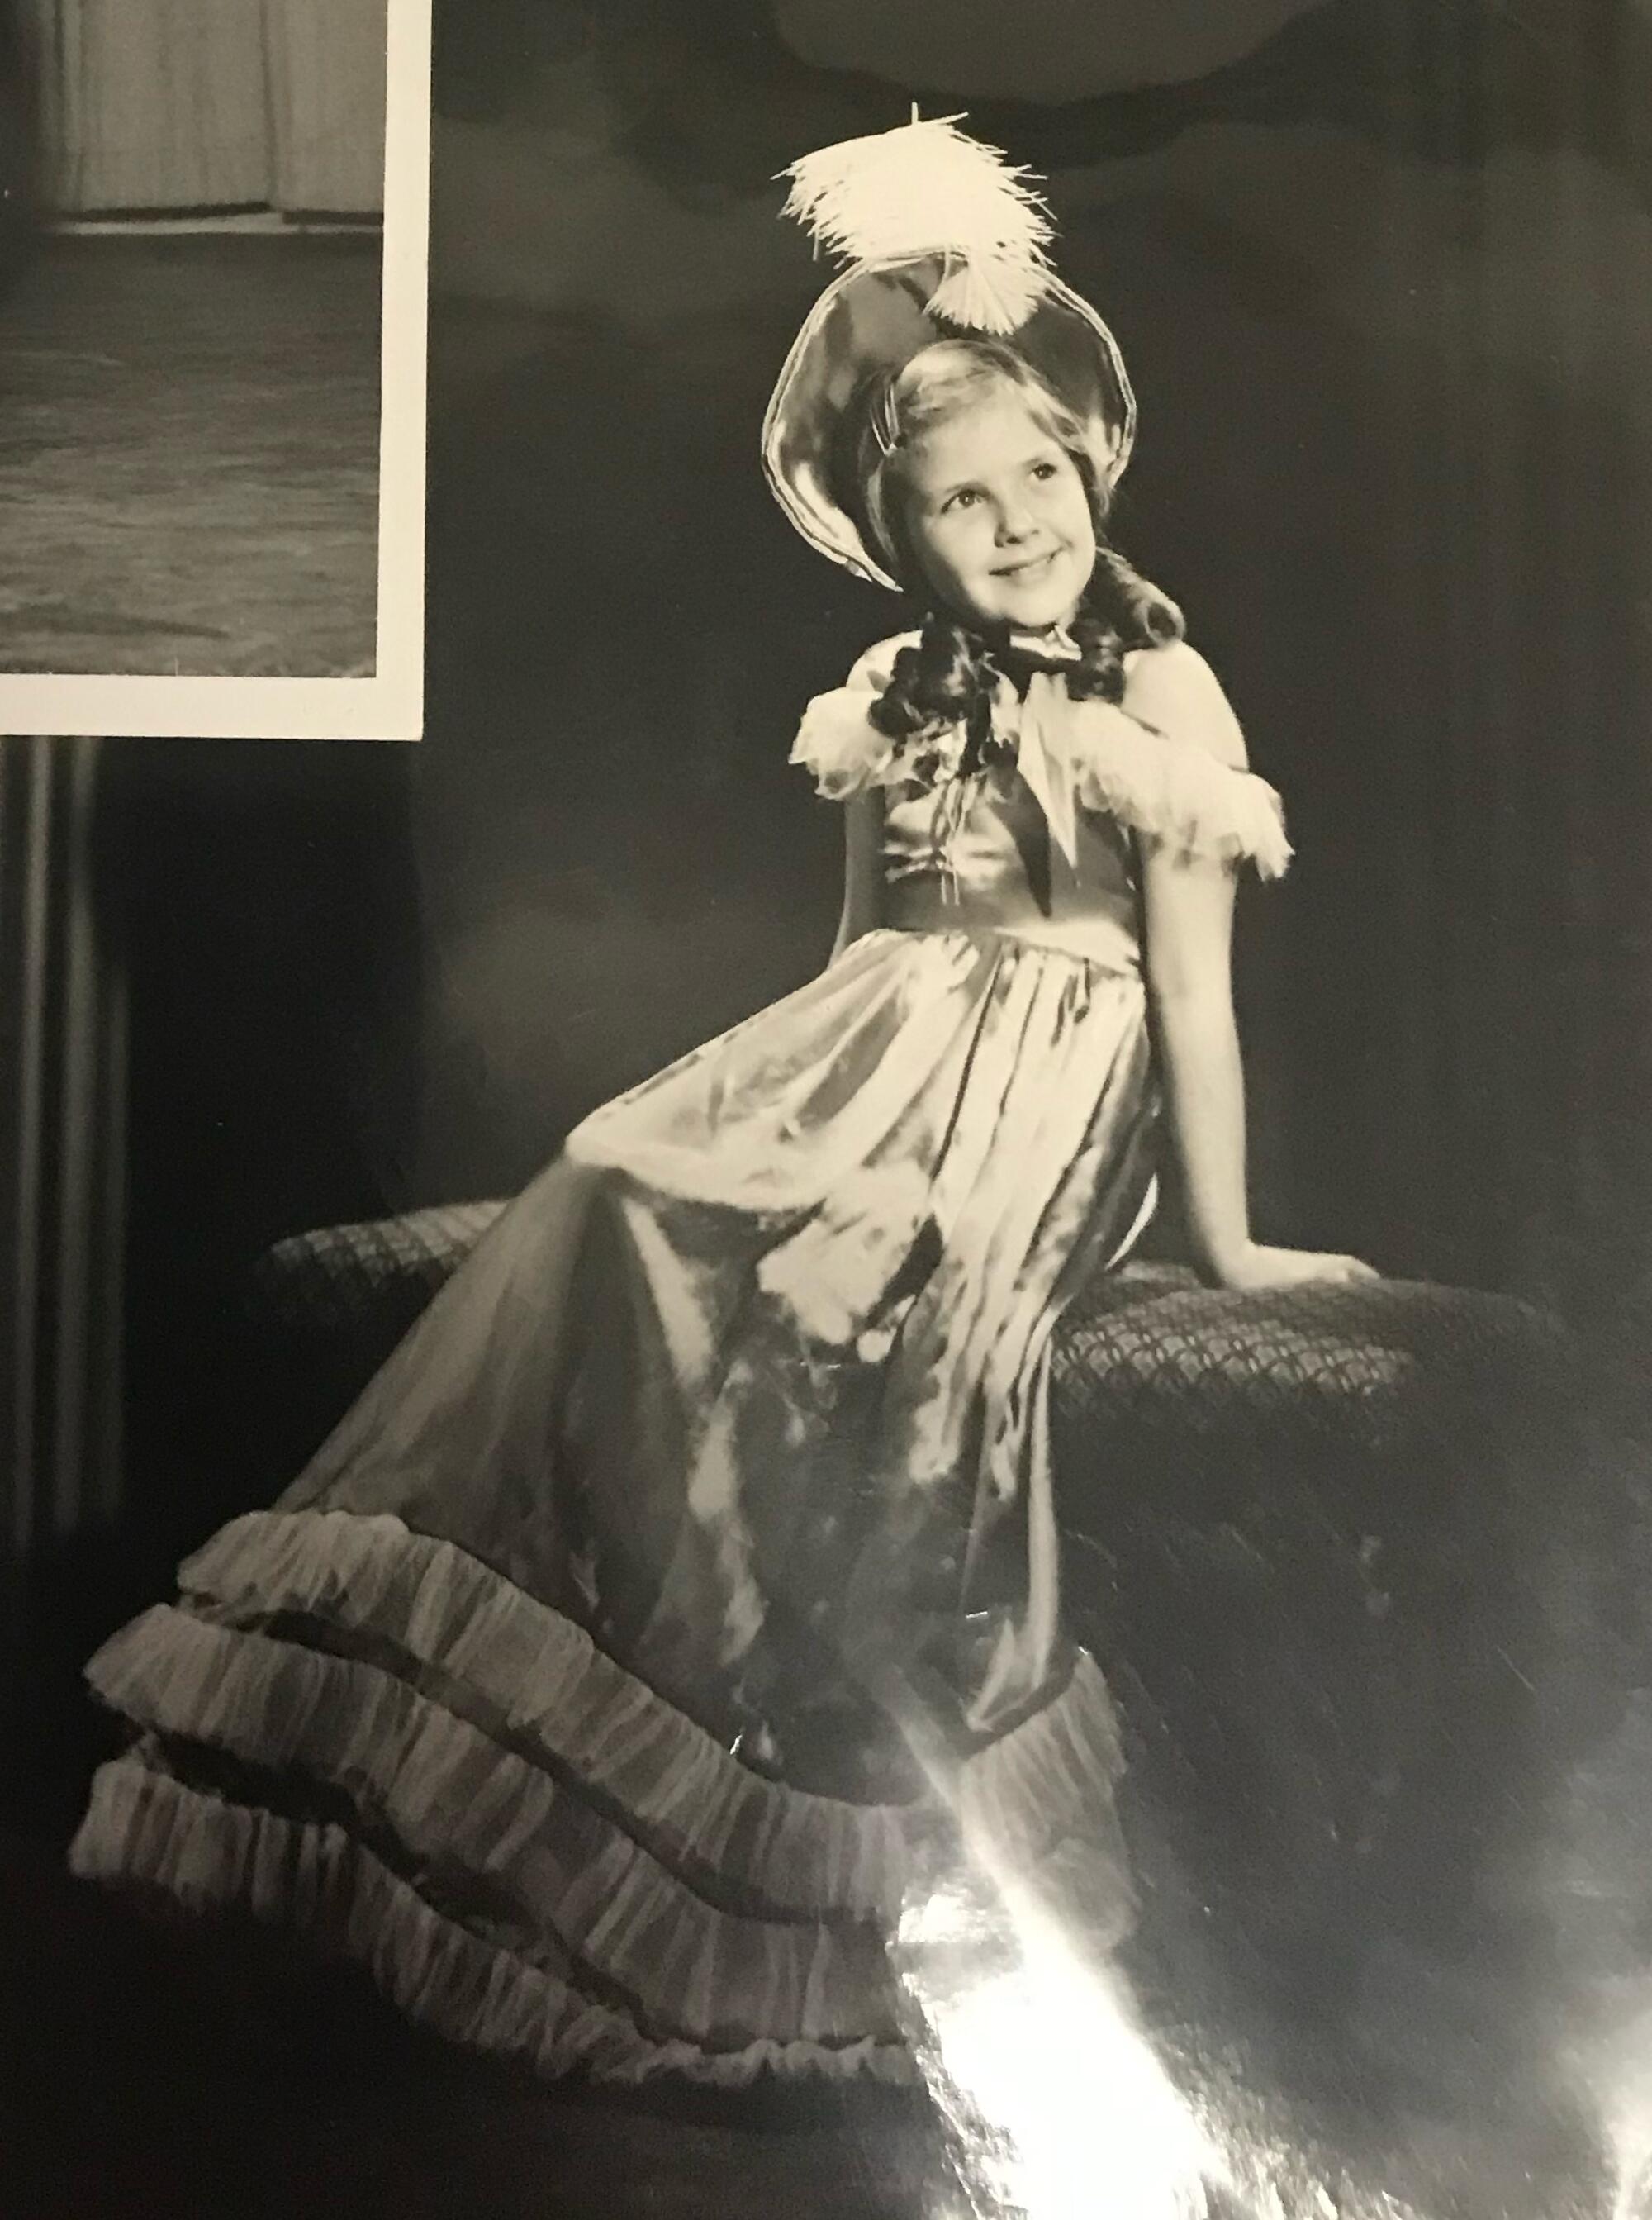 Photo of Lora Lee Michel in a dress and hat sitting on a bench.